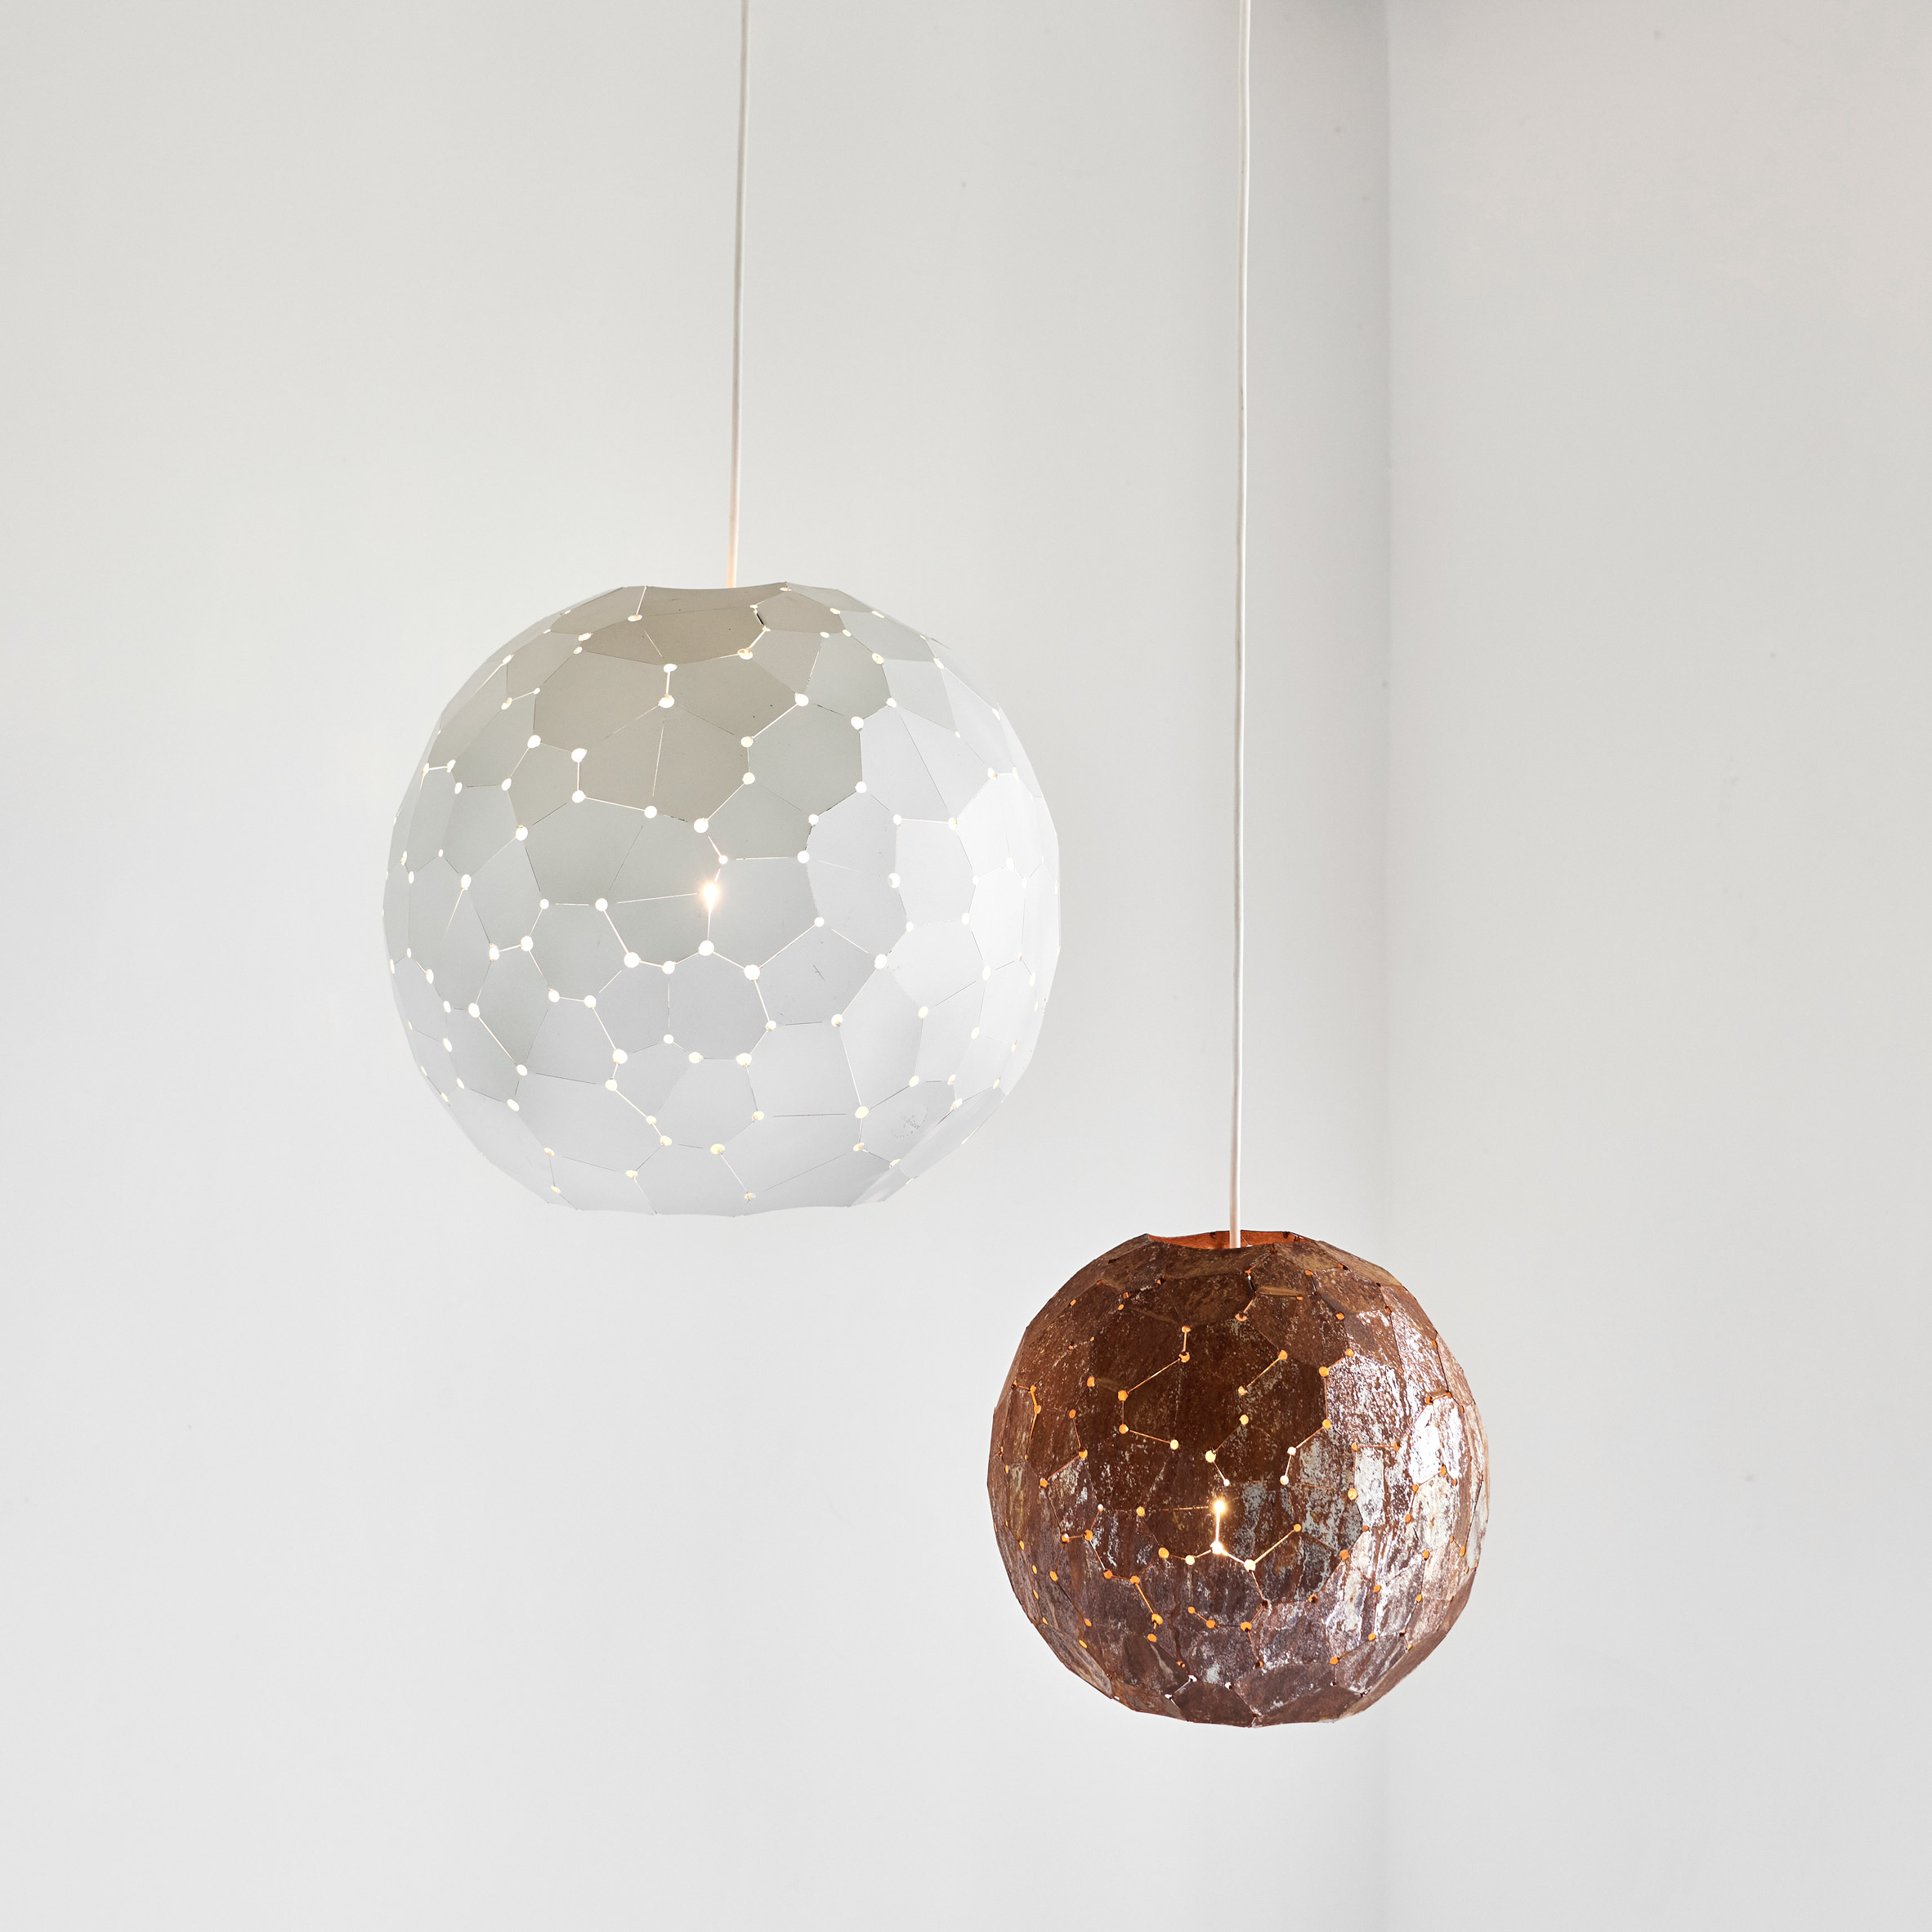 Spherical lamp shades in front of white wall